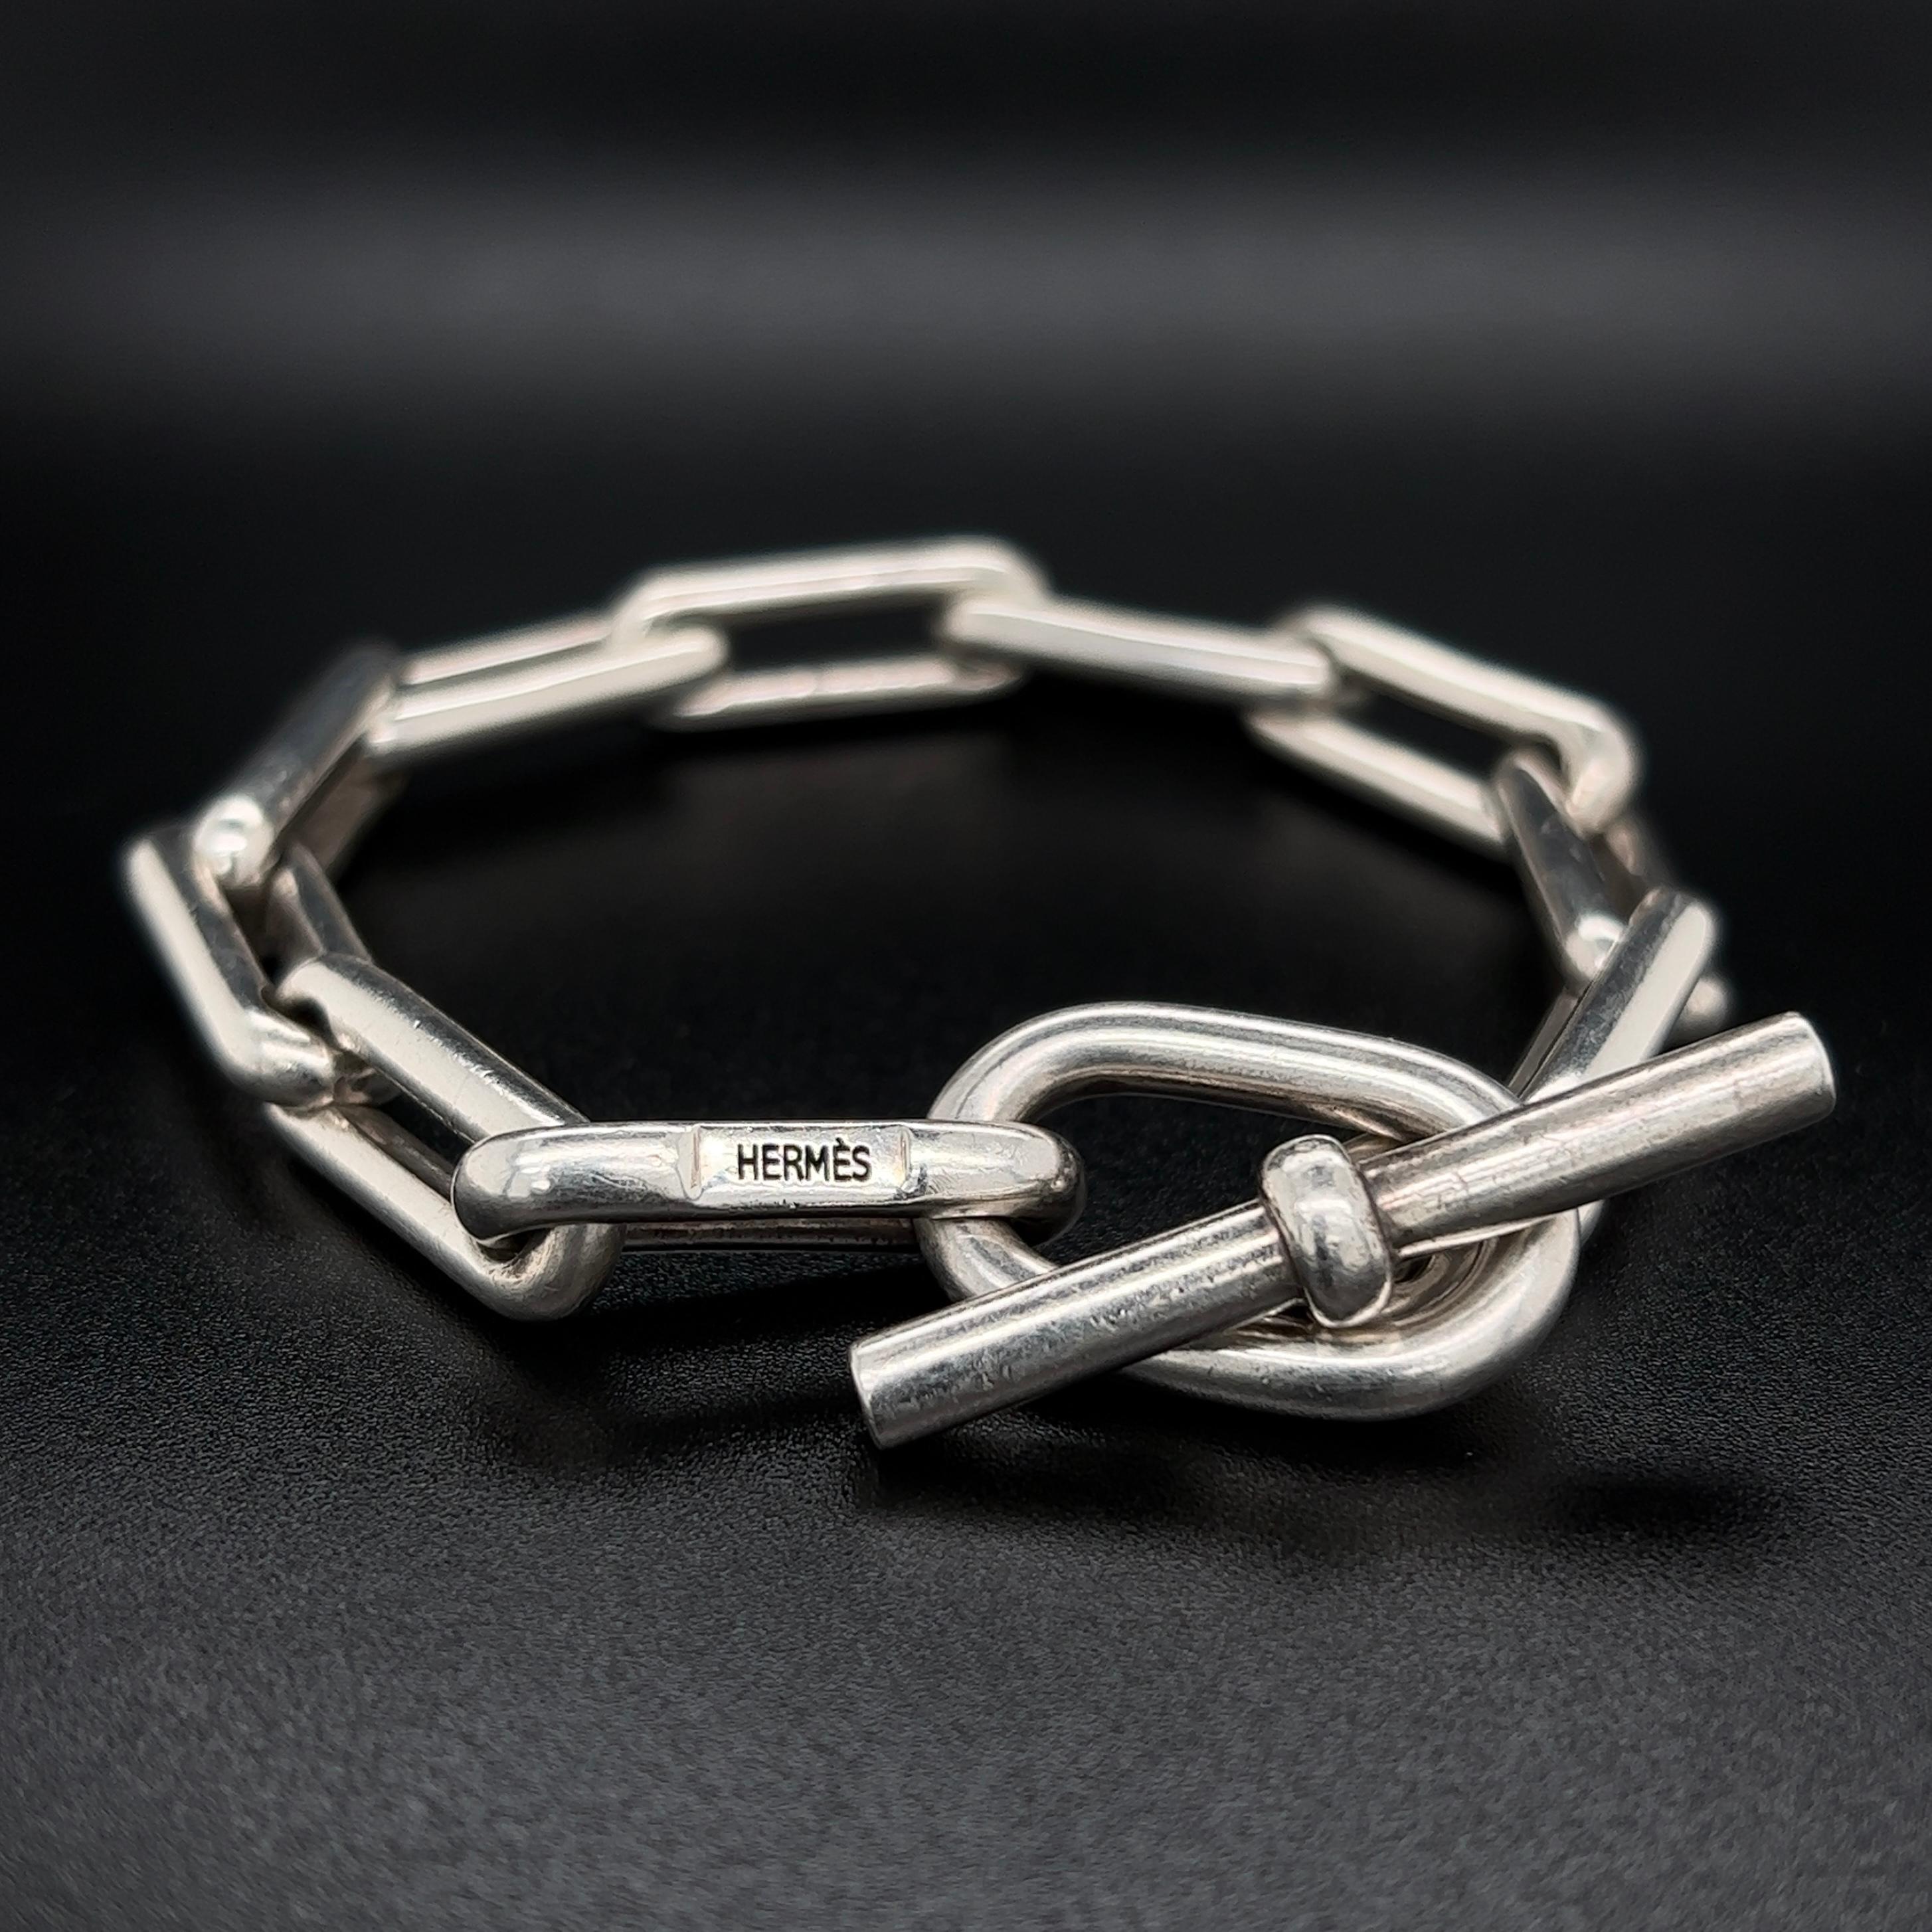 Awesome Chunky continuous Sterling Silver Open Link Toggle Bracelet, signed: measuring approx. 8.25” long. Signed: HERMES. Chic and Classic...A piece you'll turn to time and again! A Timeless Hermes Favorite! 
